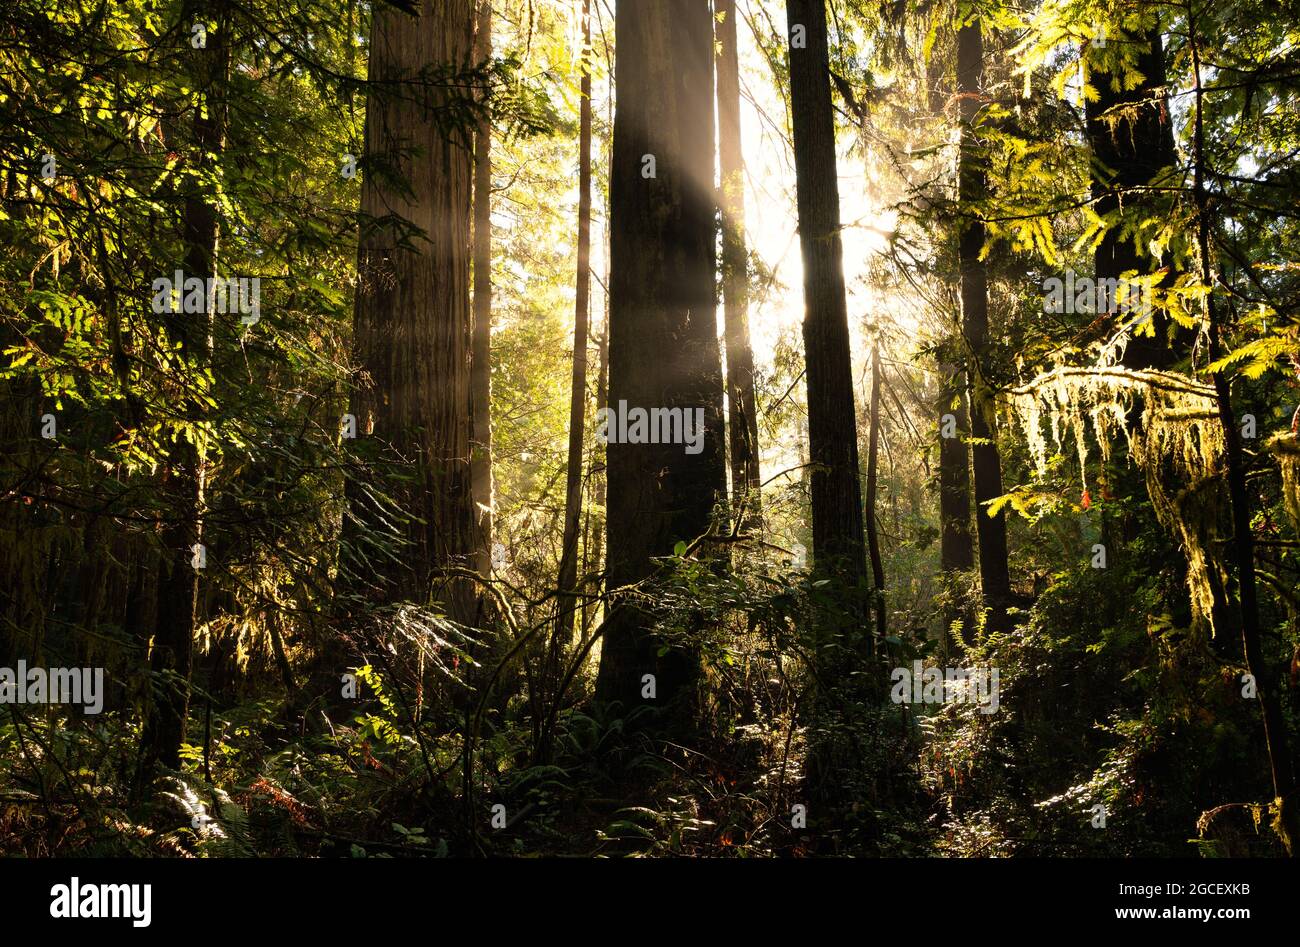 Peaceful forest scene with redwood trees backlit by setting sun Stock Photo